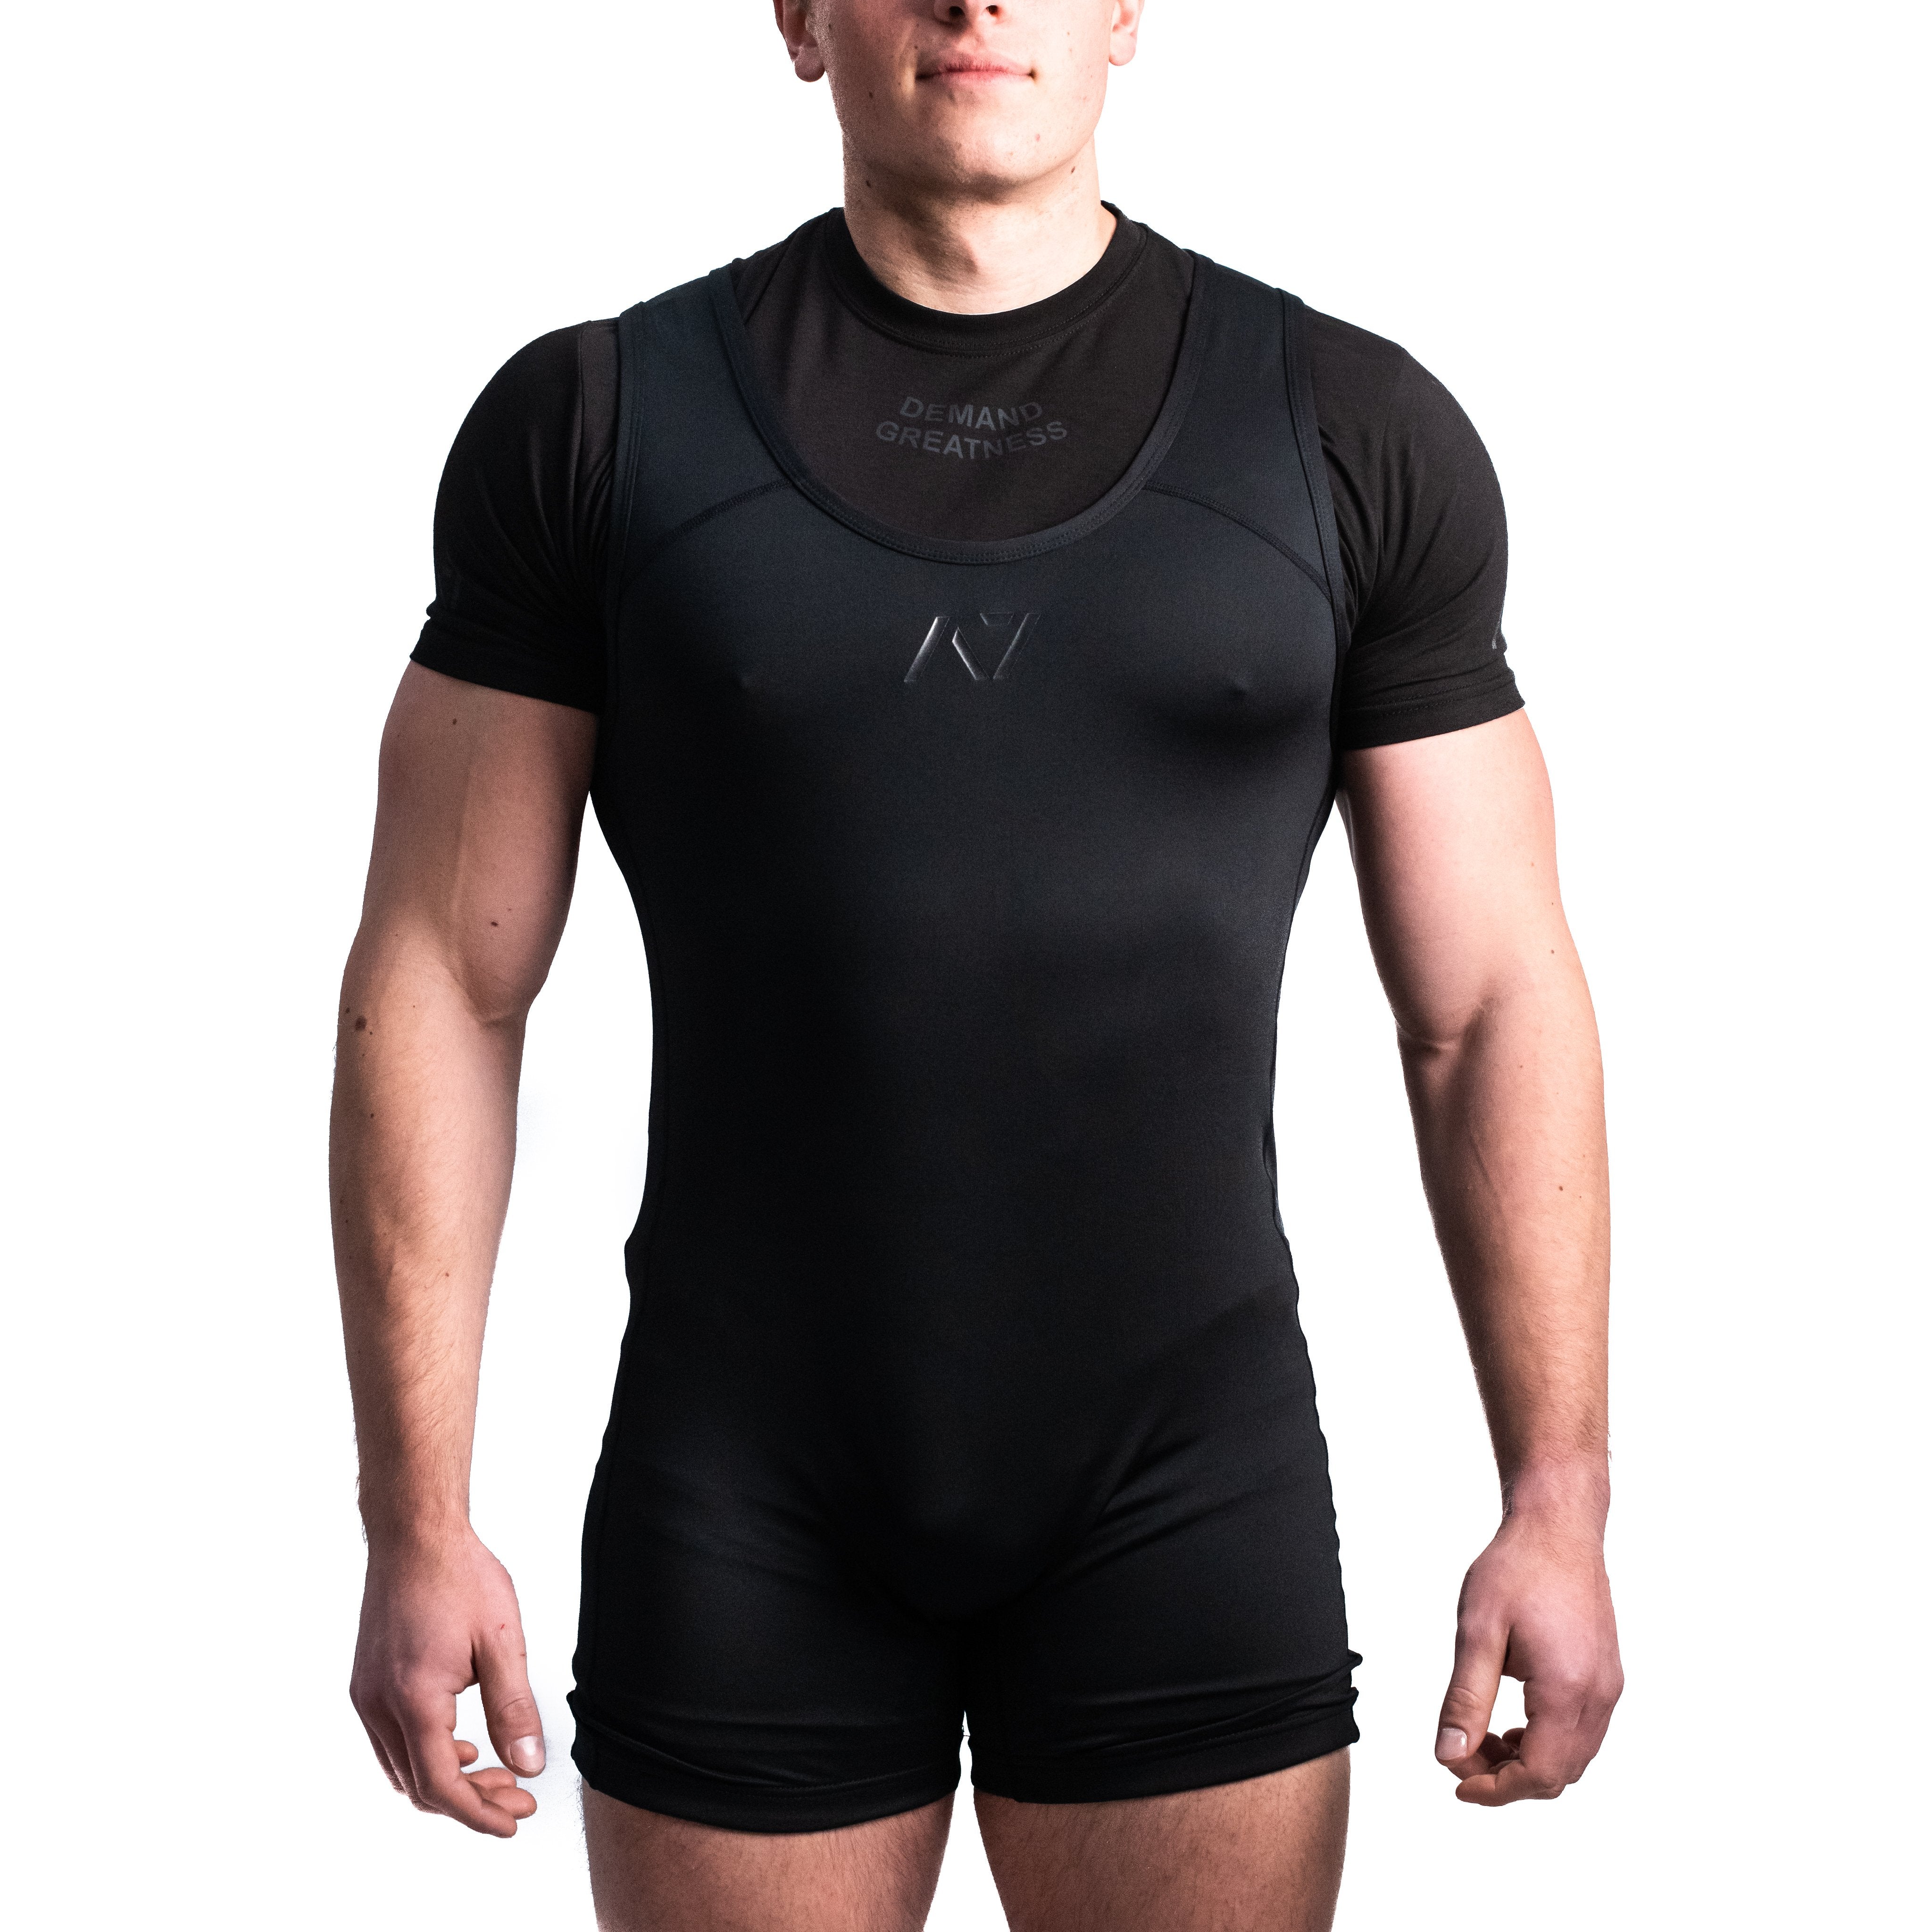 A7 IPF Approved Powerlifting Singlet is designed exclusively for powerlifting. It is very comfortable to wear and feels soft on bare skin. A7 Powerlifting Singlet is made from breathable fabric and provides compression during your lifts. The perfect piece of IPF Approved Kit! A7 Europe shipping to EU including France, Italy, Poland, Sweden, Netherlands..